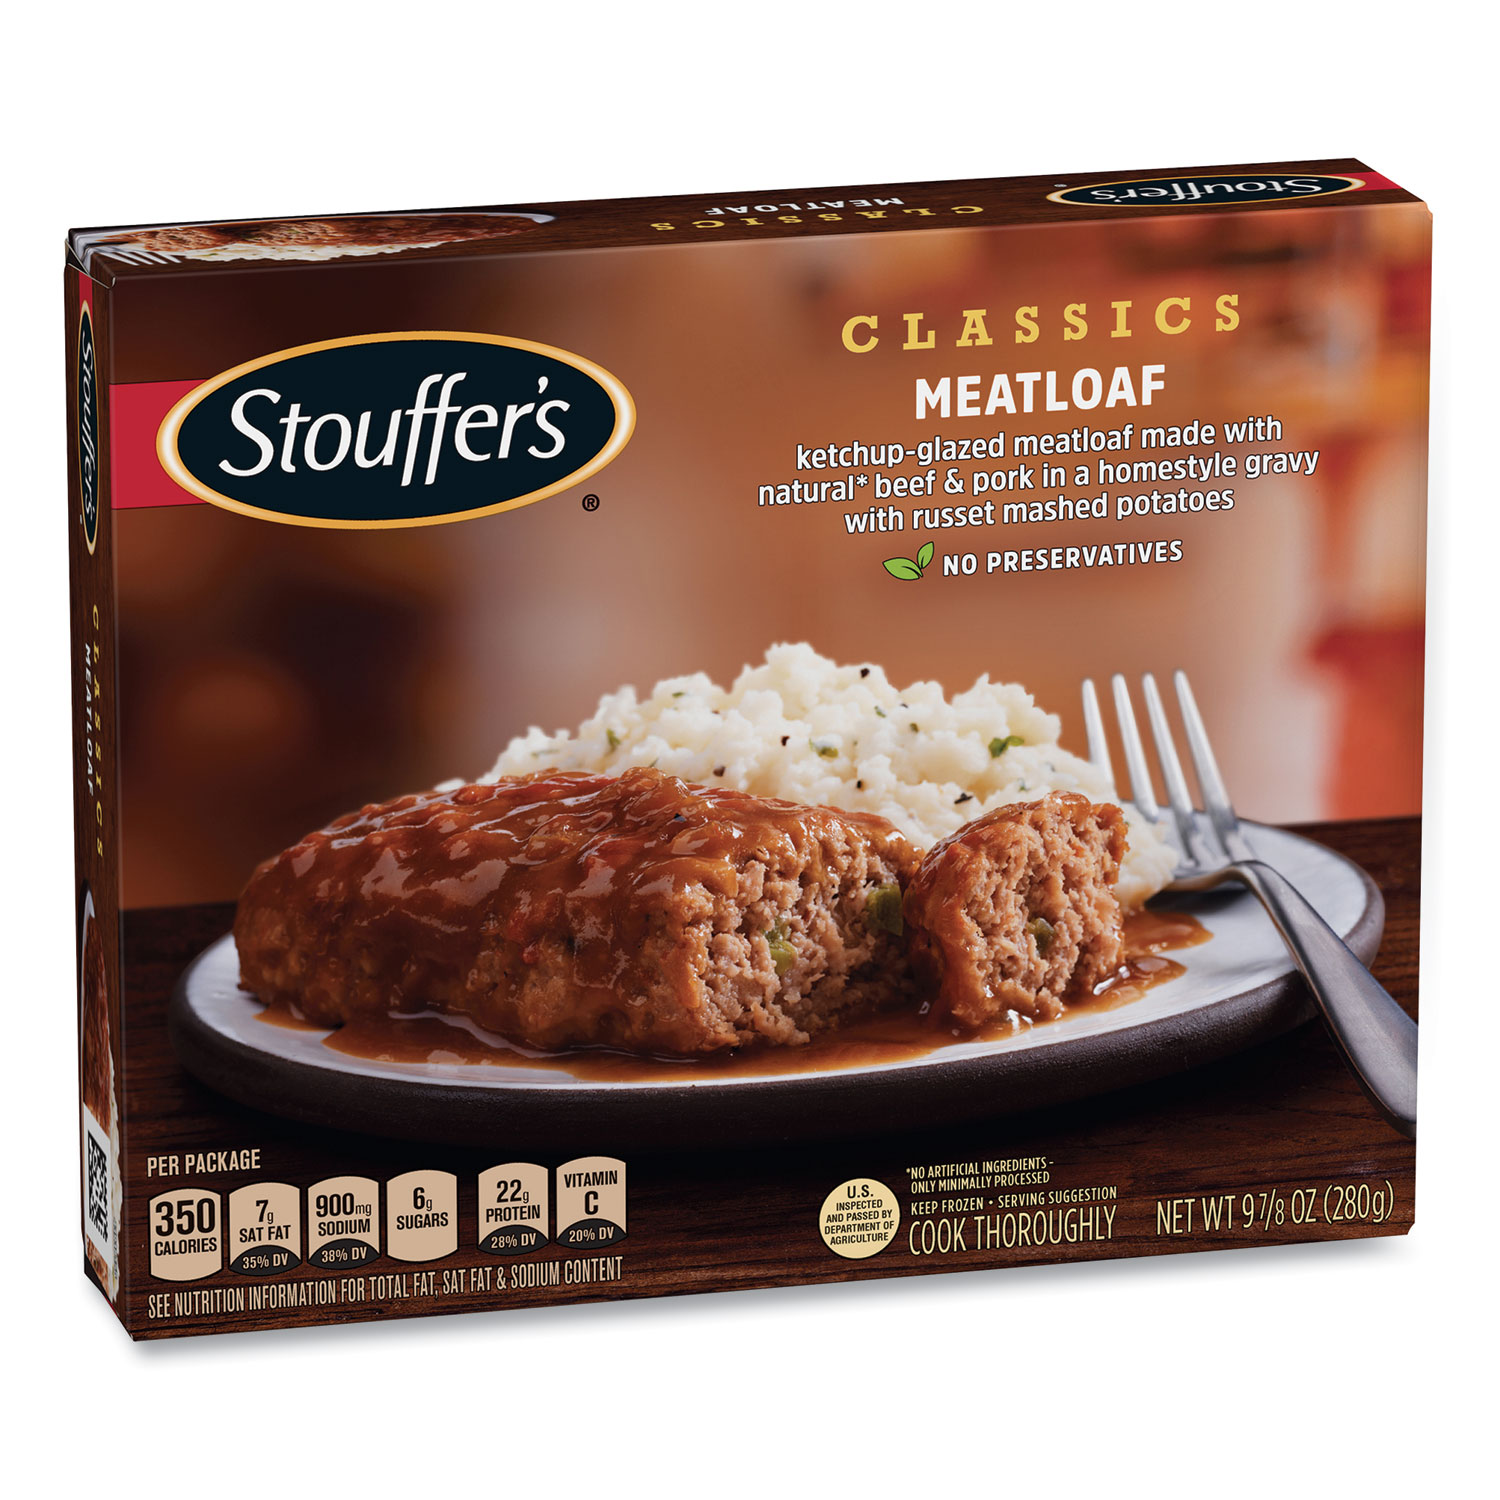  Stouffer's 100723 Classics Meatloaf with Mashed Potatoes, 9,88 oz Box, 3 Boxes/Pack, Free Delivery in 1-4 Business Days (GRR90300129) 